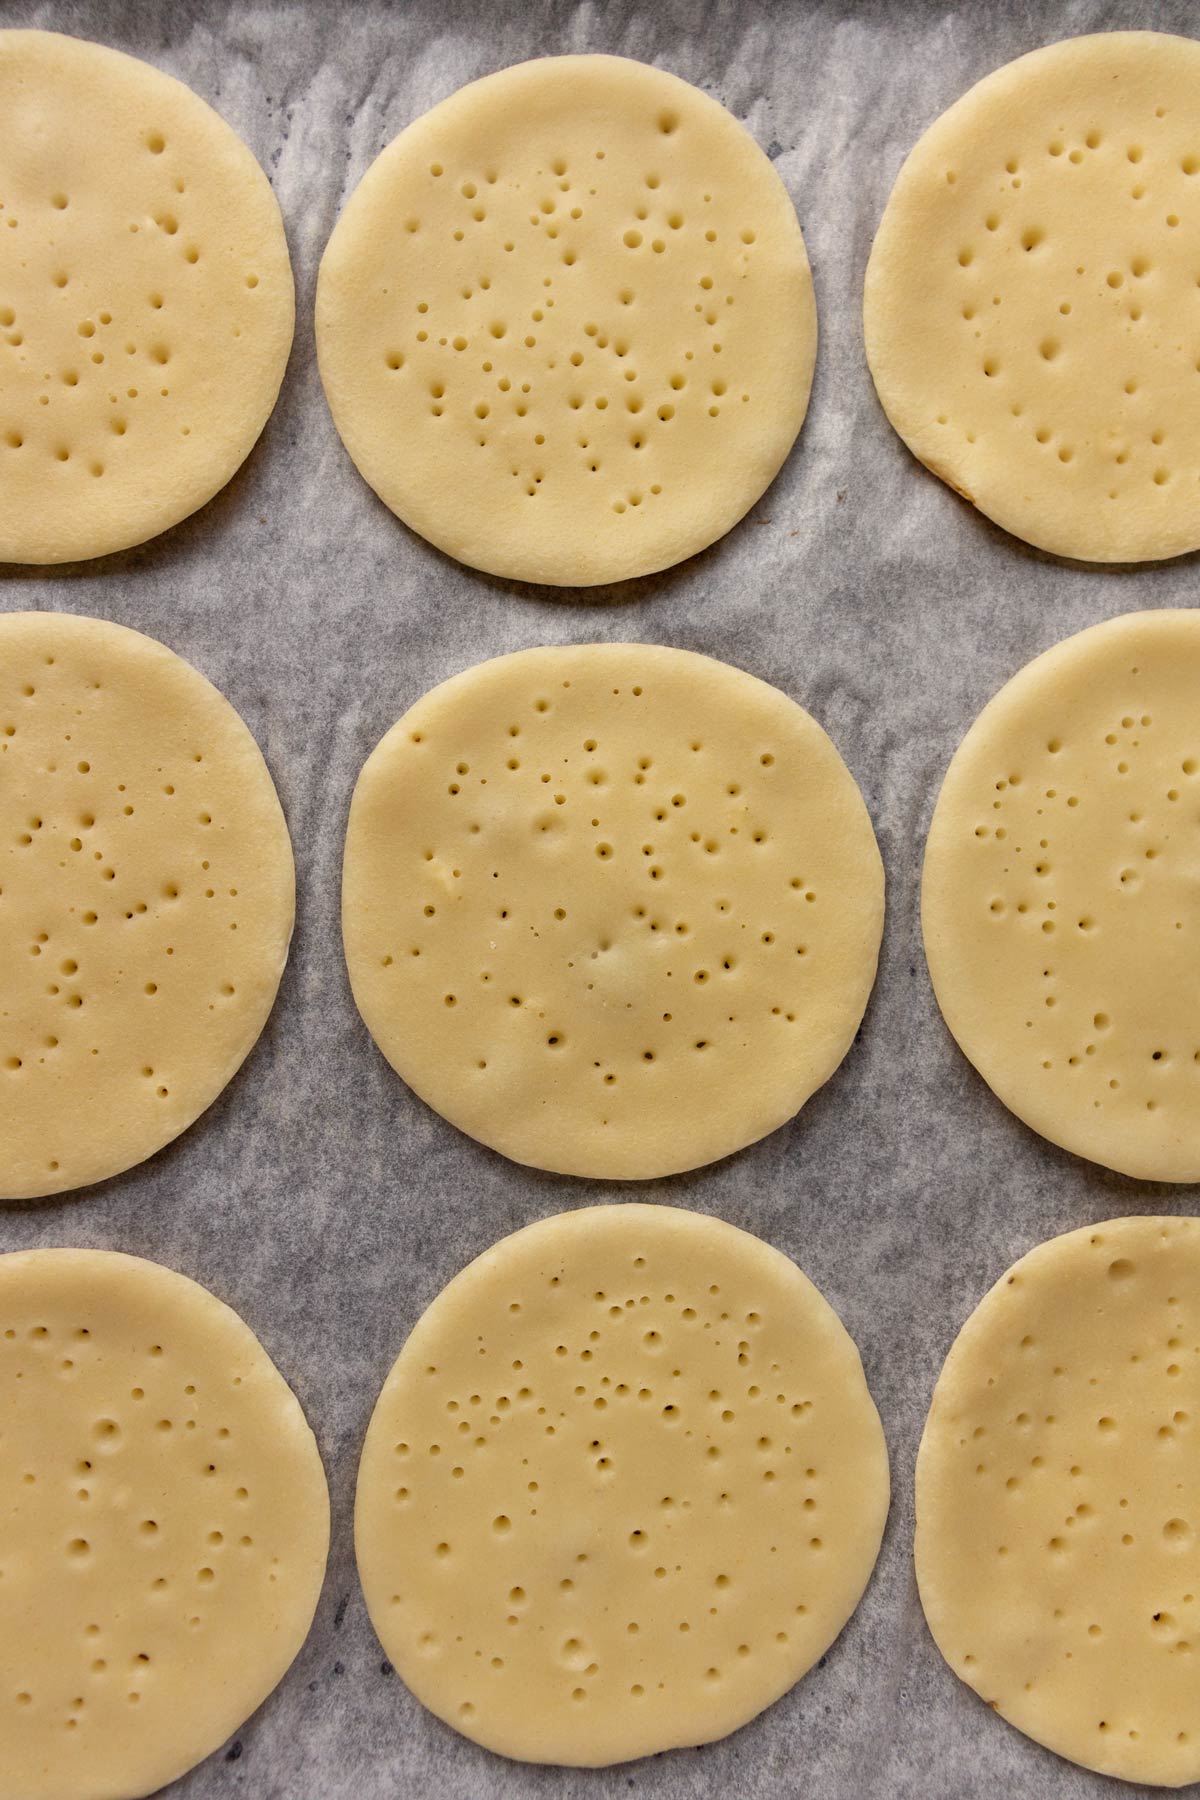 Rows of small pancakes with bubbles on the surface arranged in rows on parchment paper.